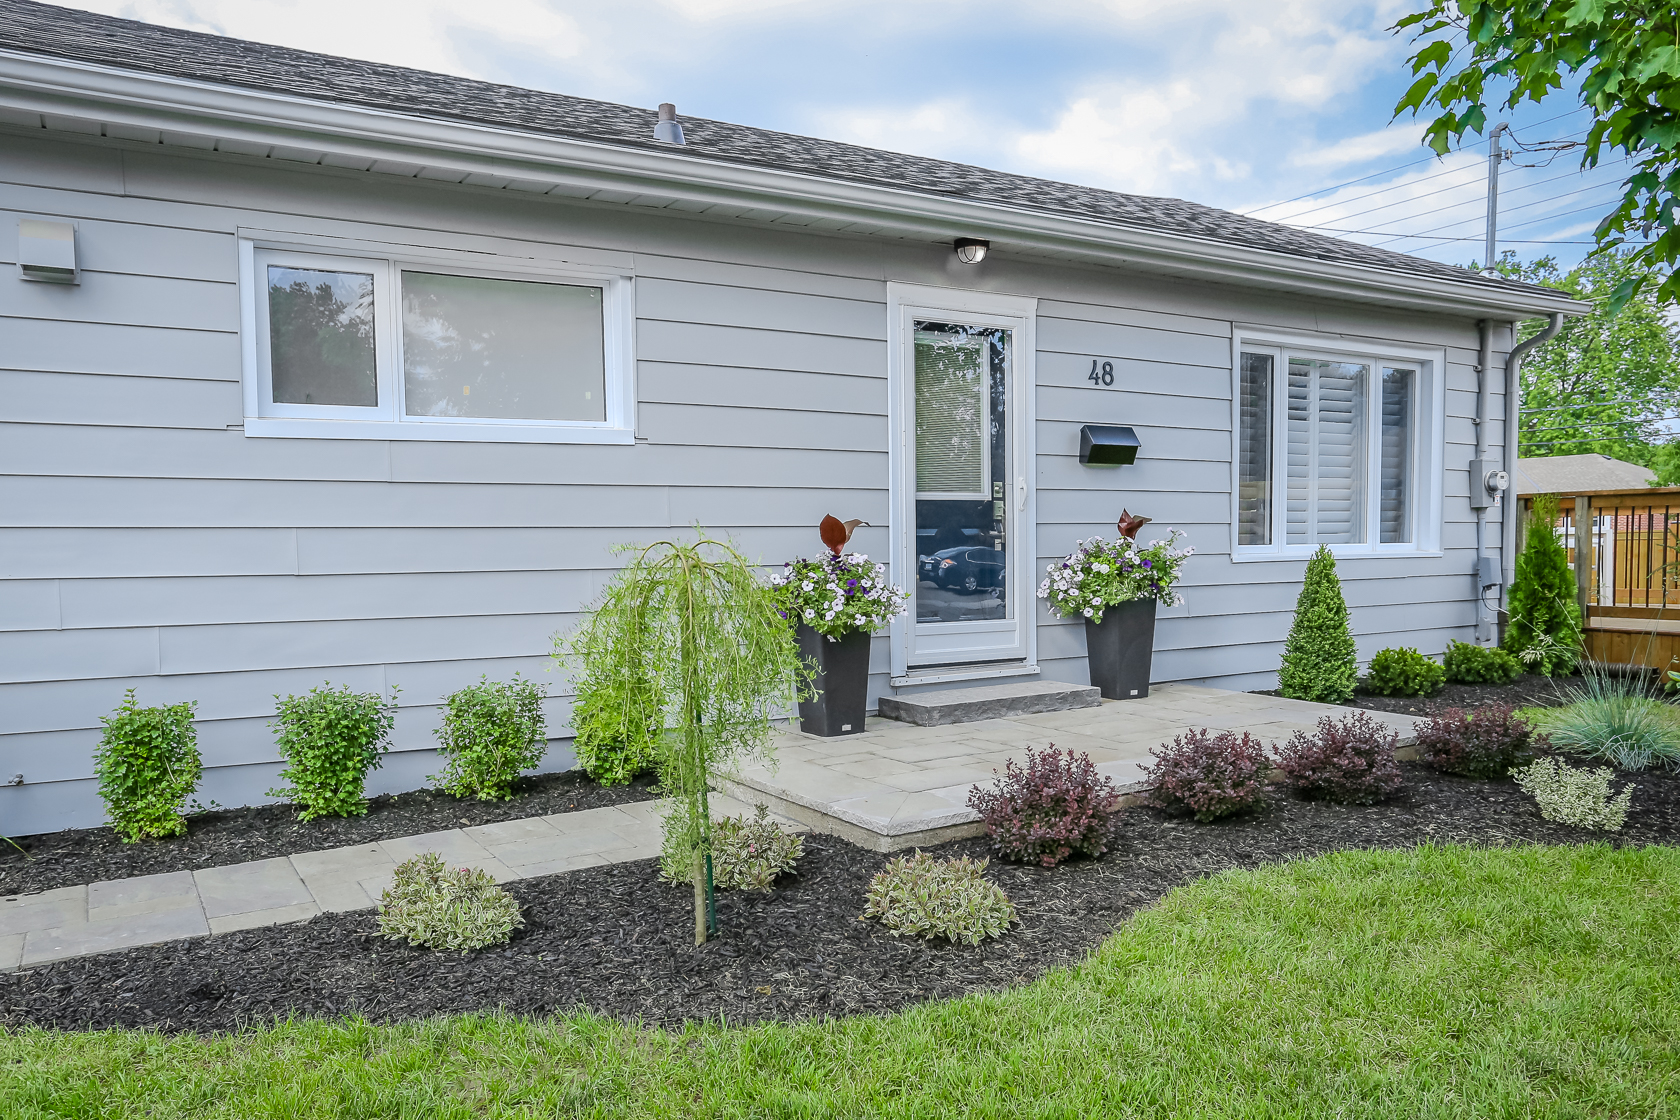 Home with grey siding and bushes and planters